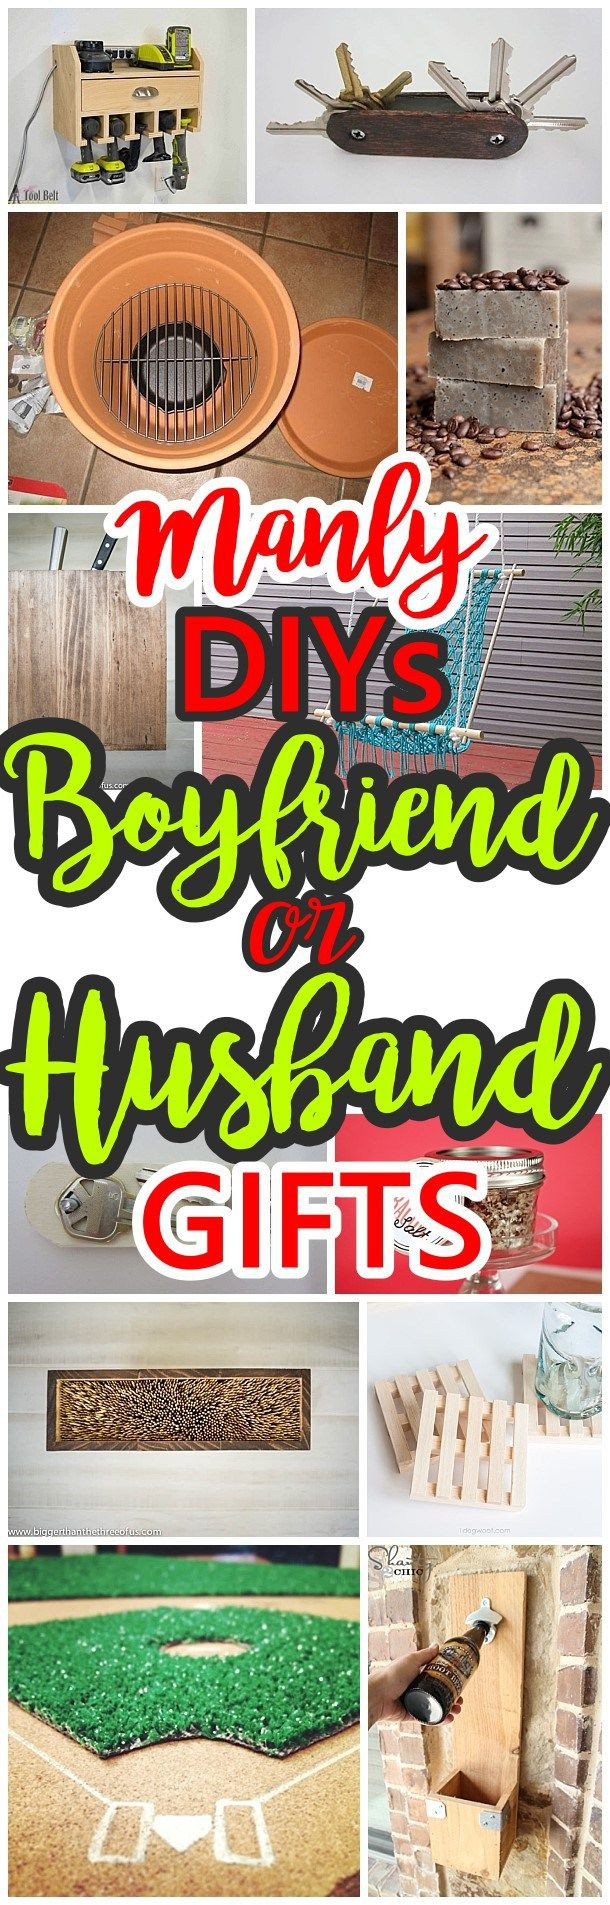 DIY Christmas Gifts For Brother
 Best 25 Men ts ideas on Pinterest